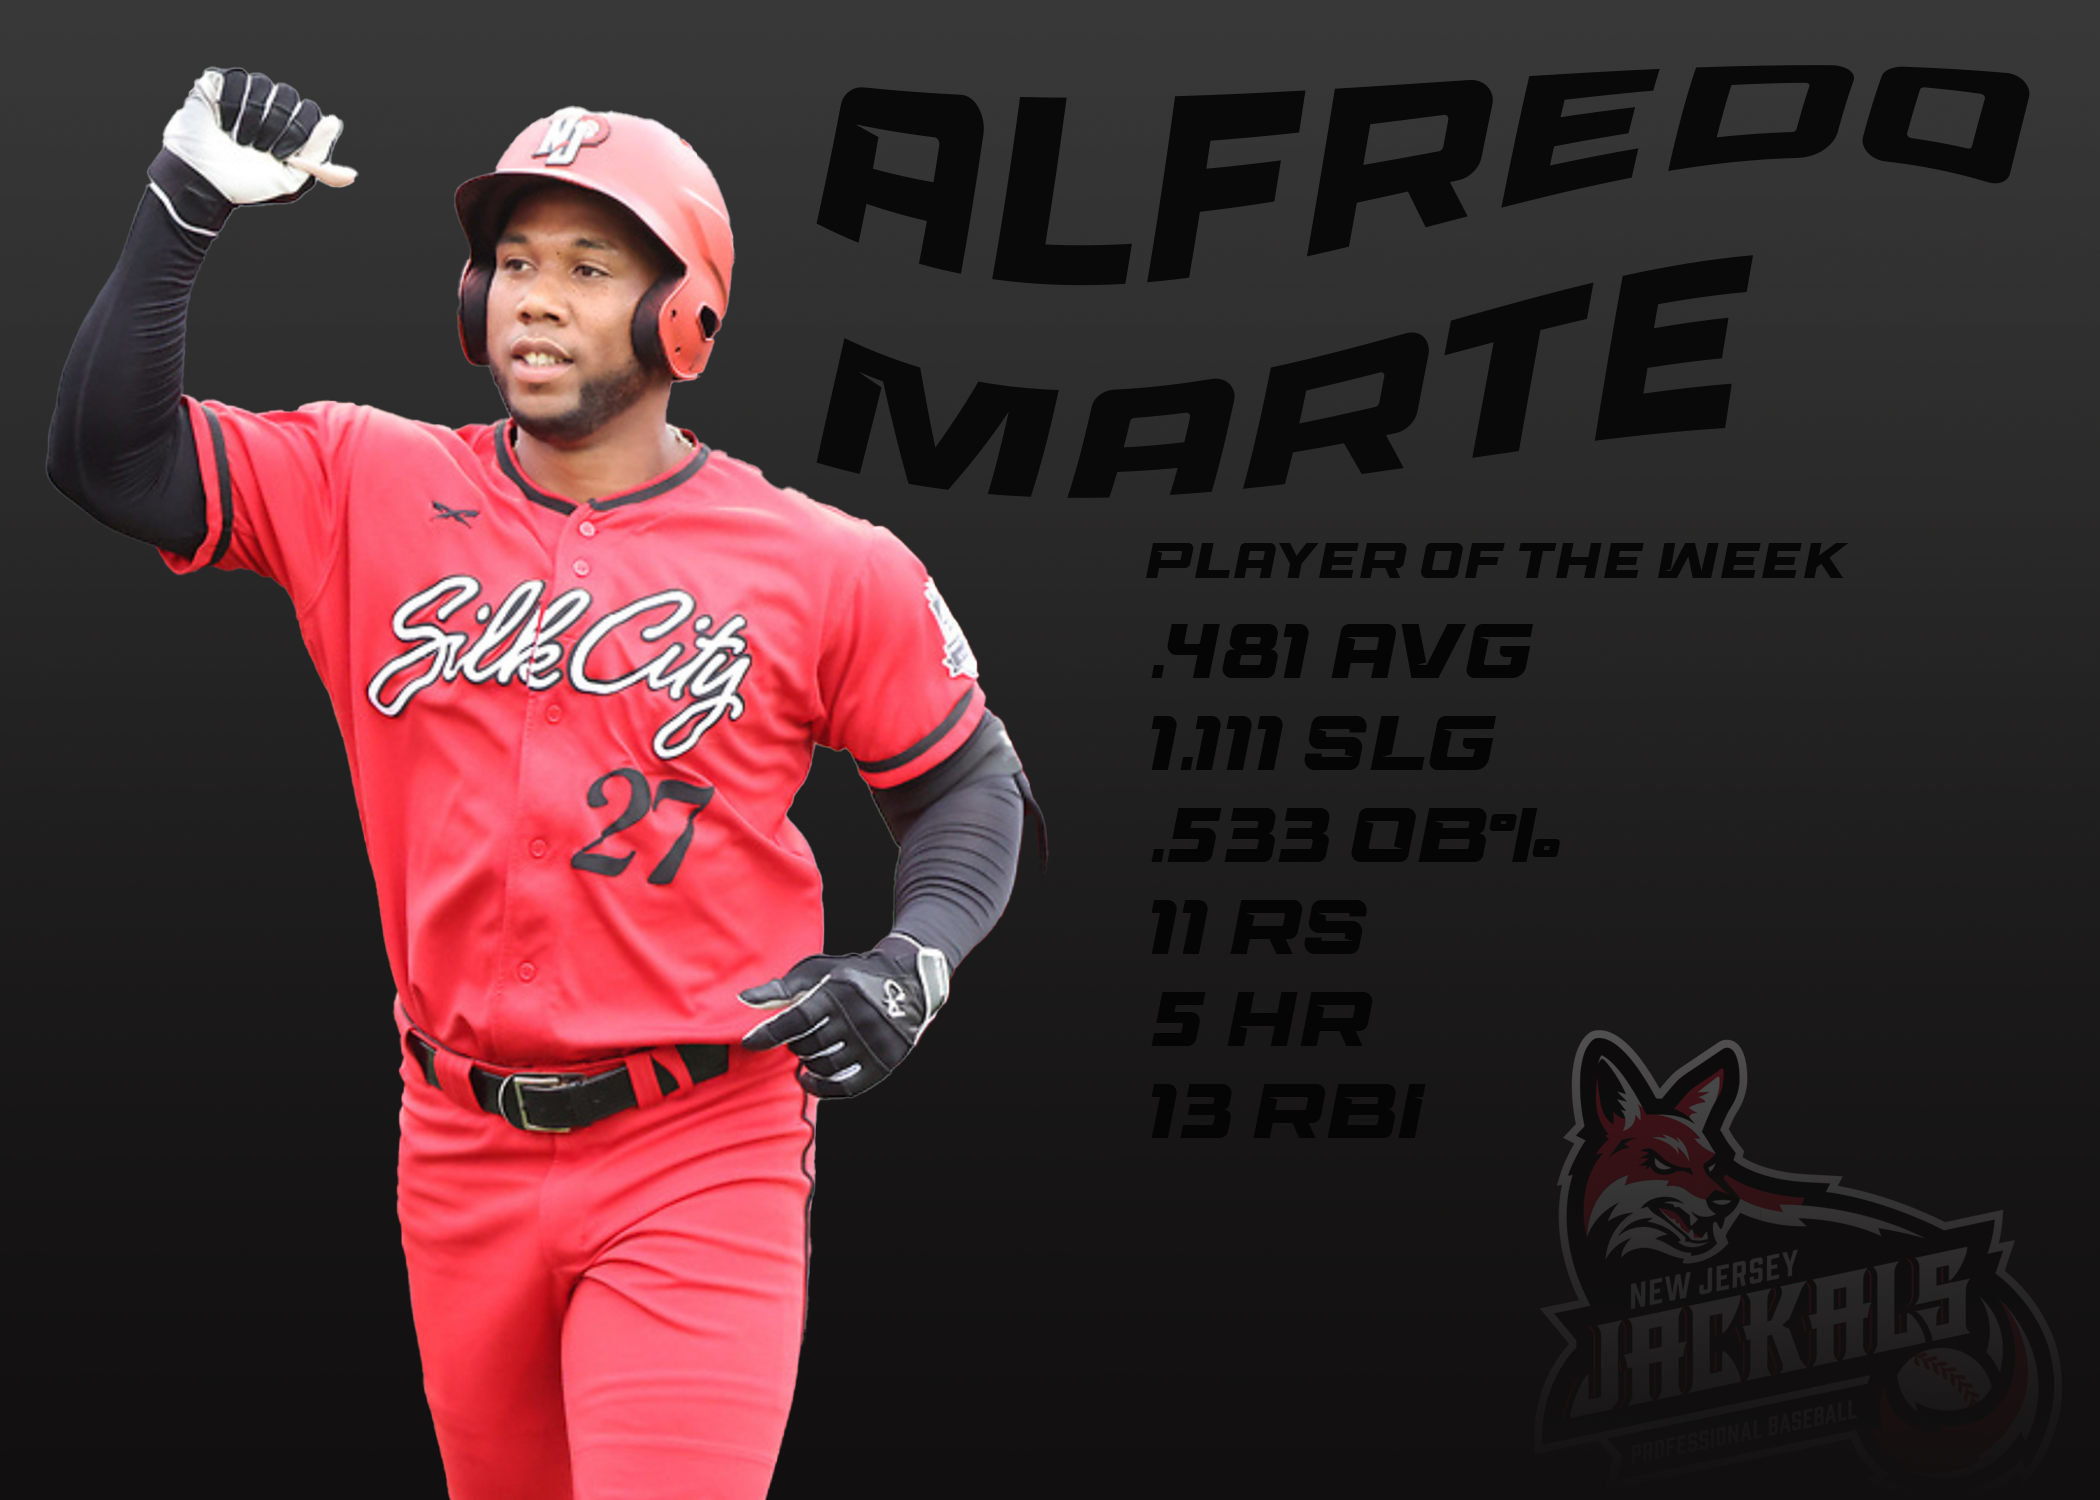 ALFREDO MARTE OF THE NEW JERSEY JACKALS WINS PLAYER OF THE WEEK